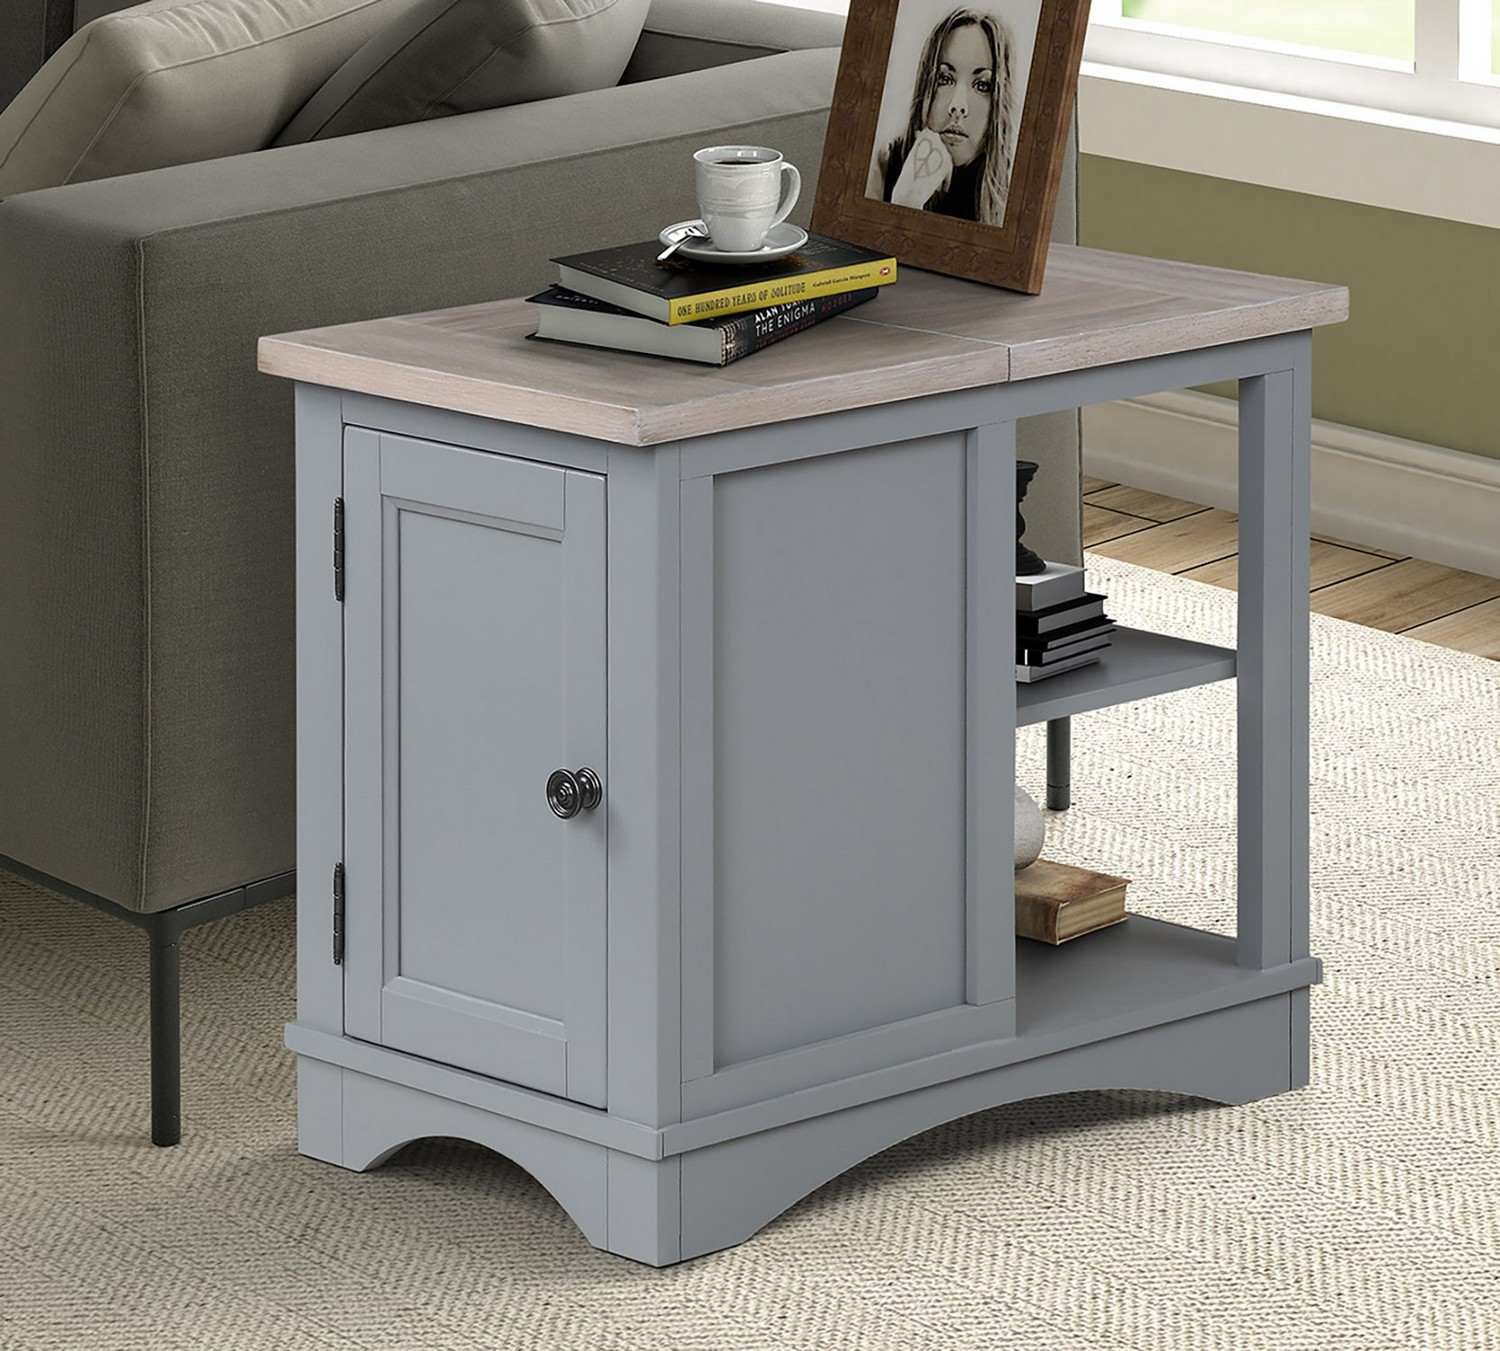 Parker House Americana Modern Chairside Table - Dove